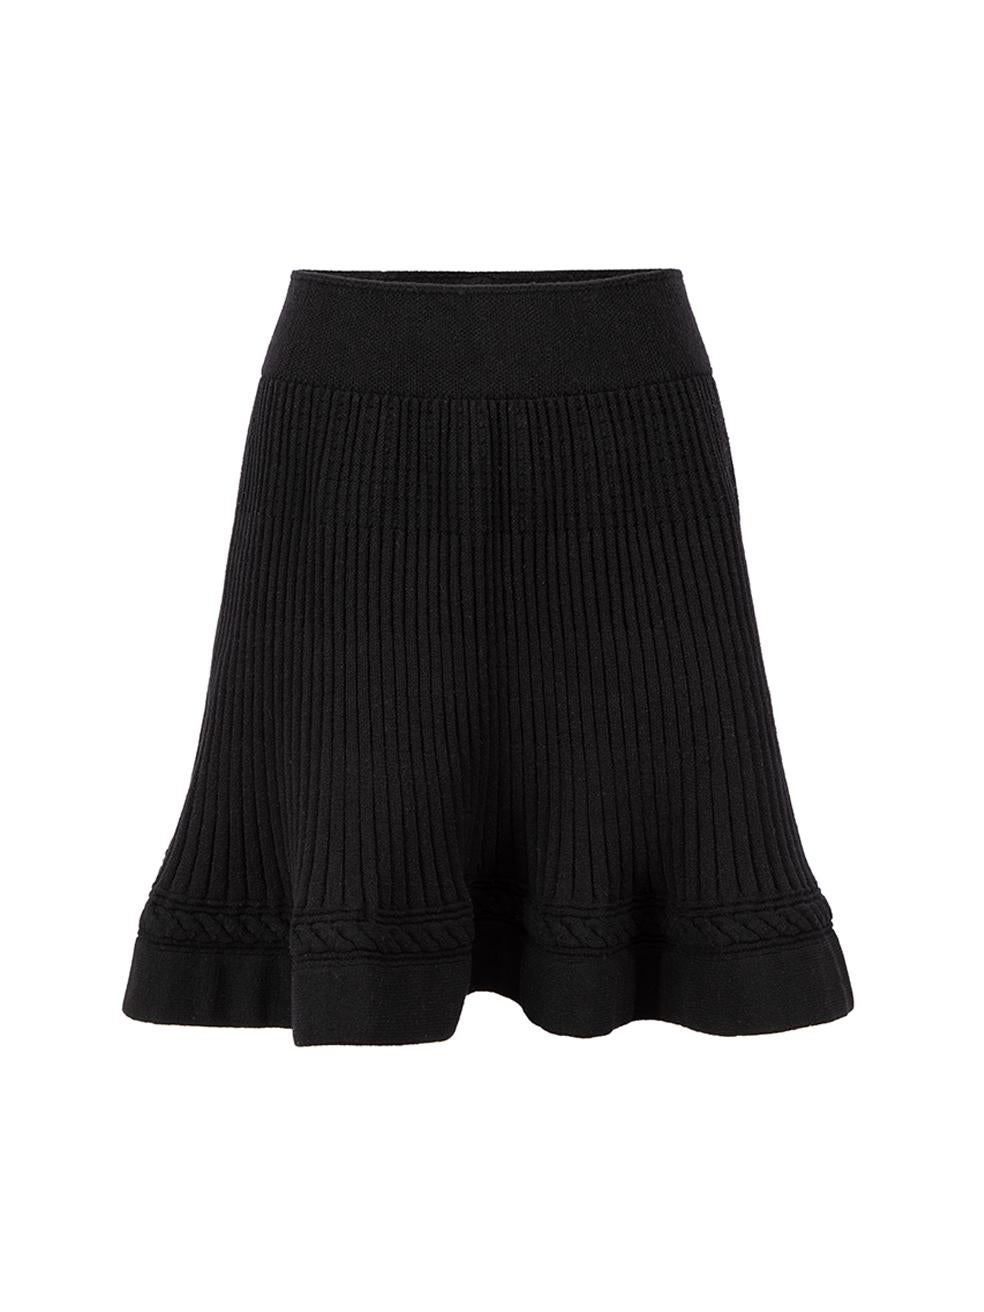 Alaïa Black Wool Knit Circle Skirt Size XS In Good Condition In London, GB